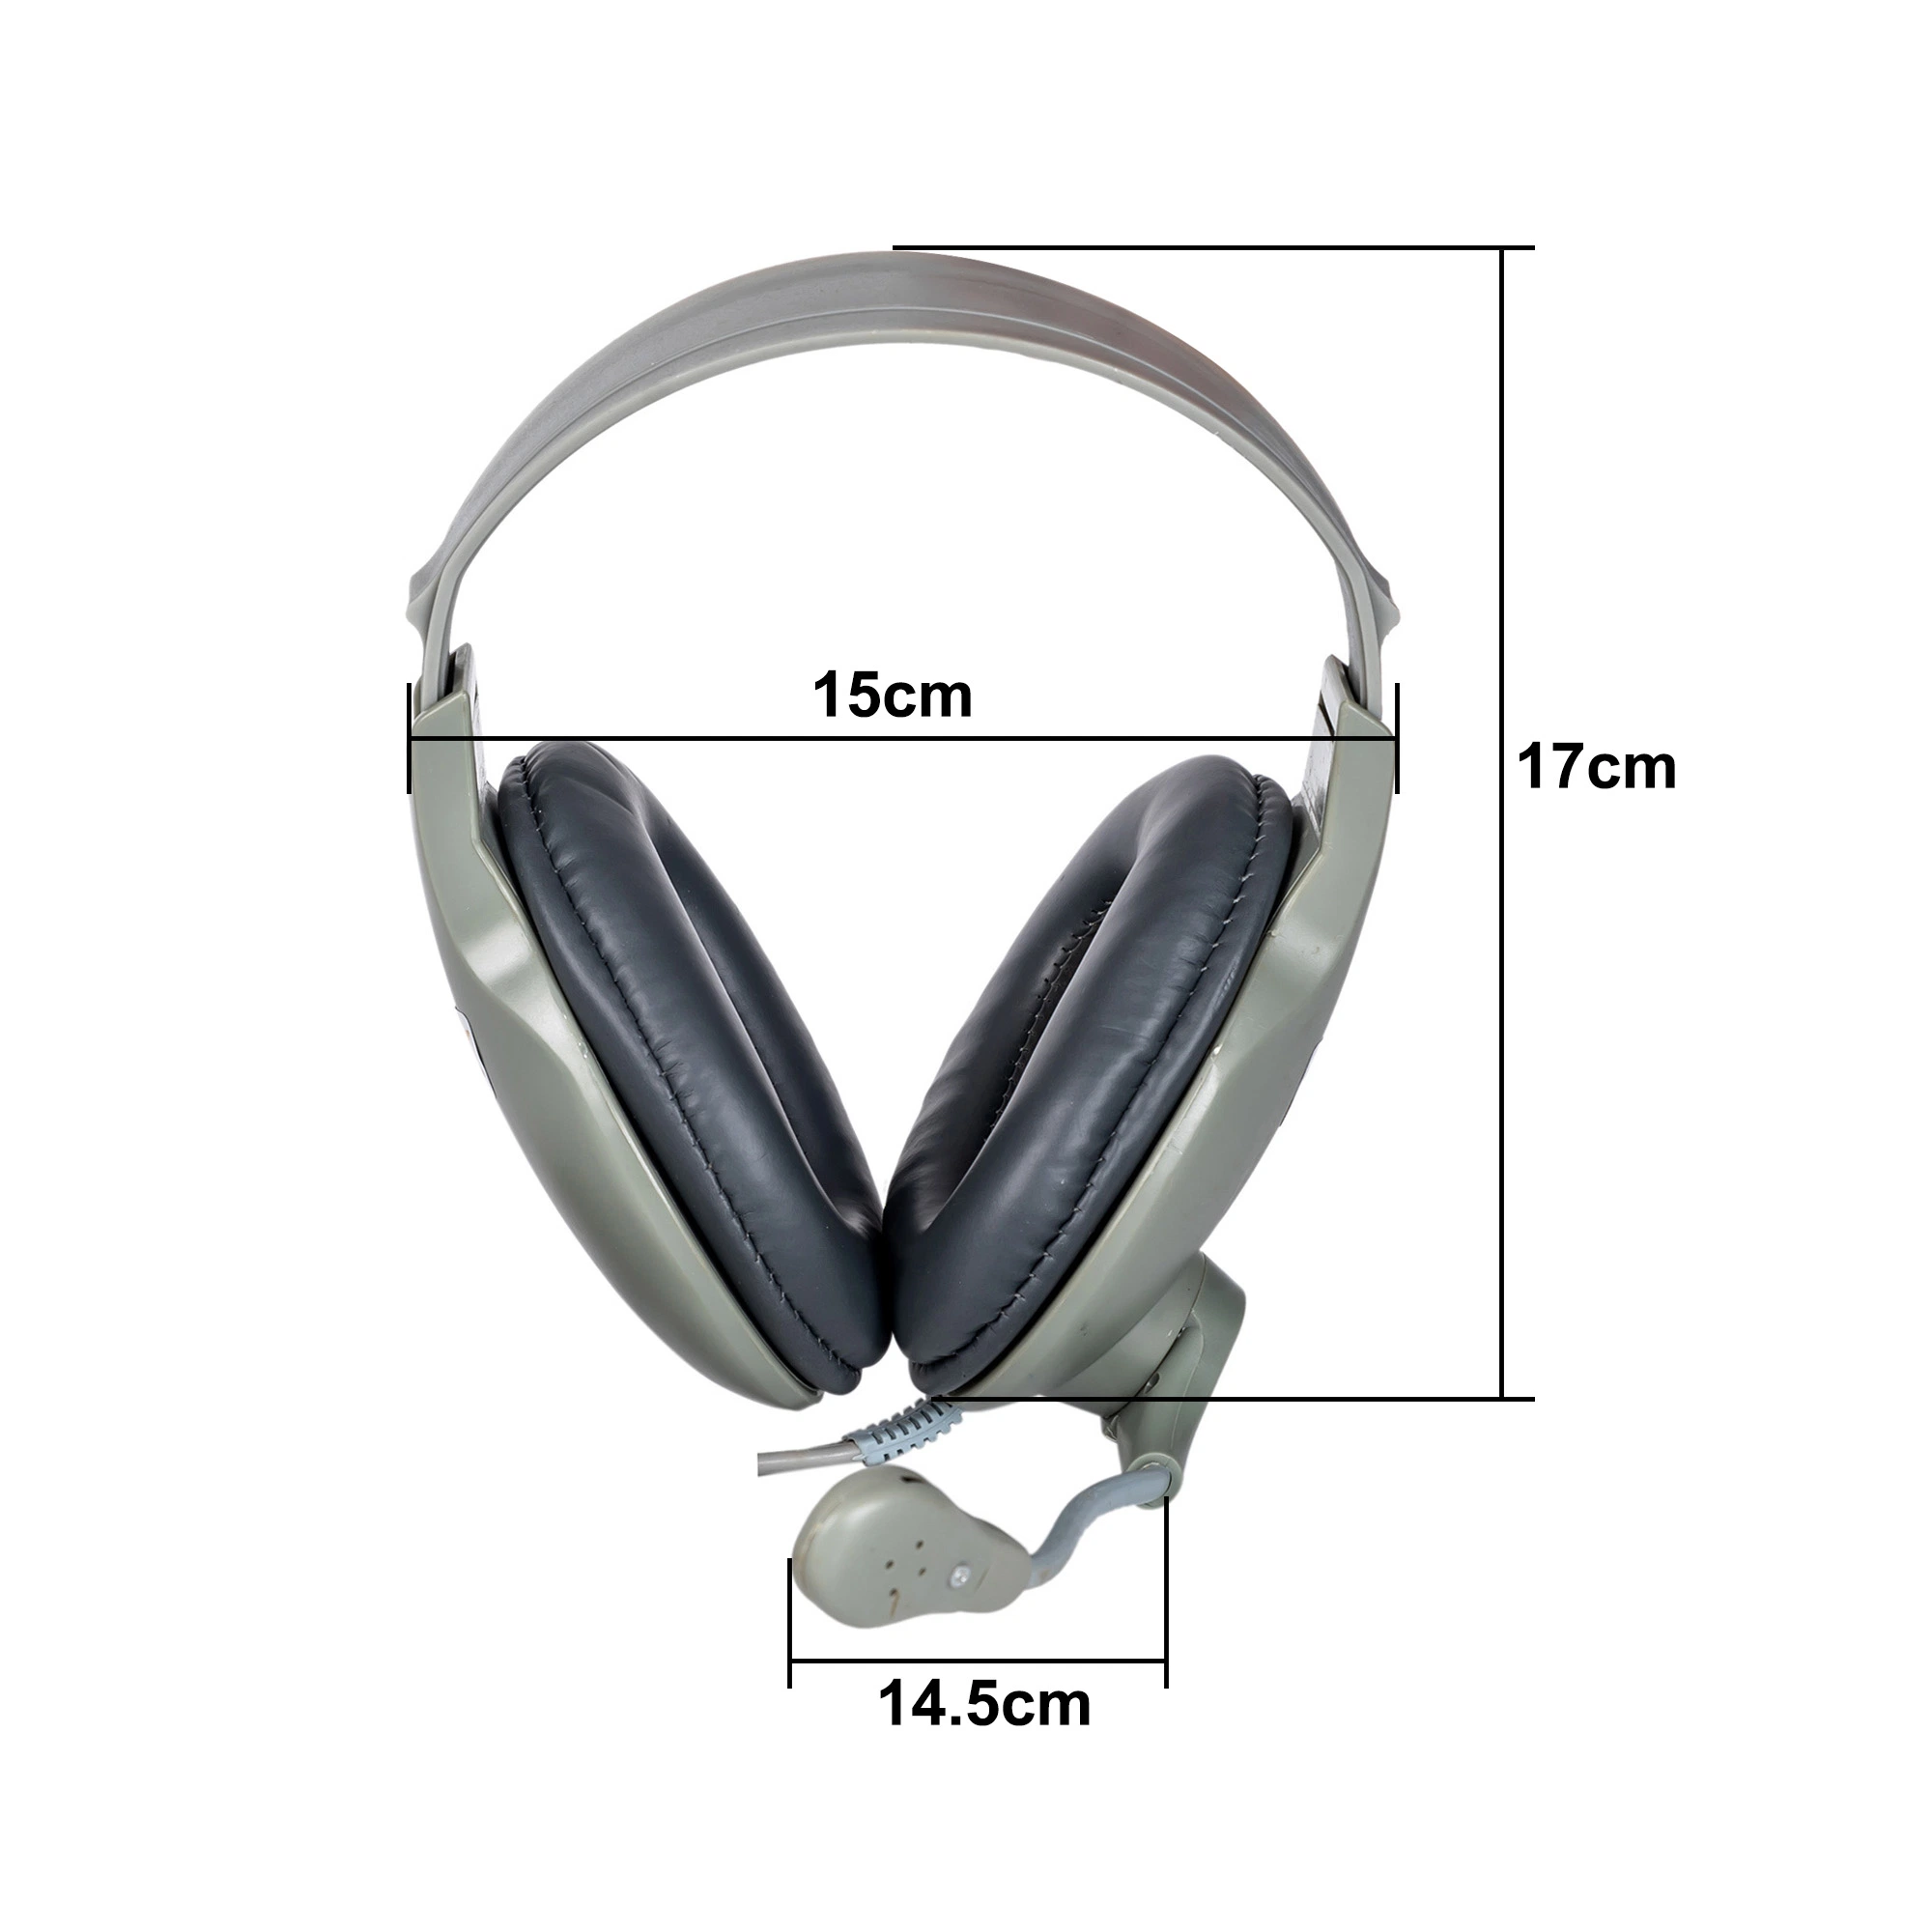 Headset 3.5mm Language Lab Headset Headphone CE RoHS OEM Used for Language Computer Lab Wired Cable Noise Cancelling Professional Xrl